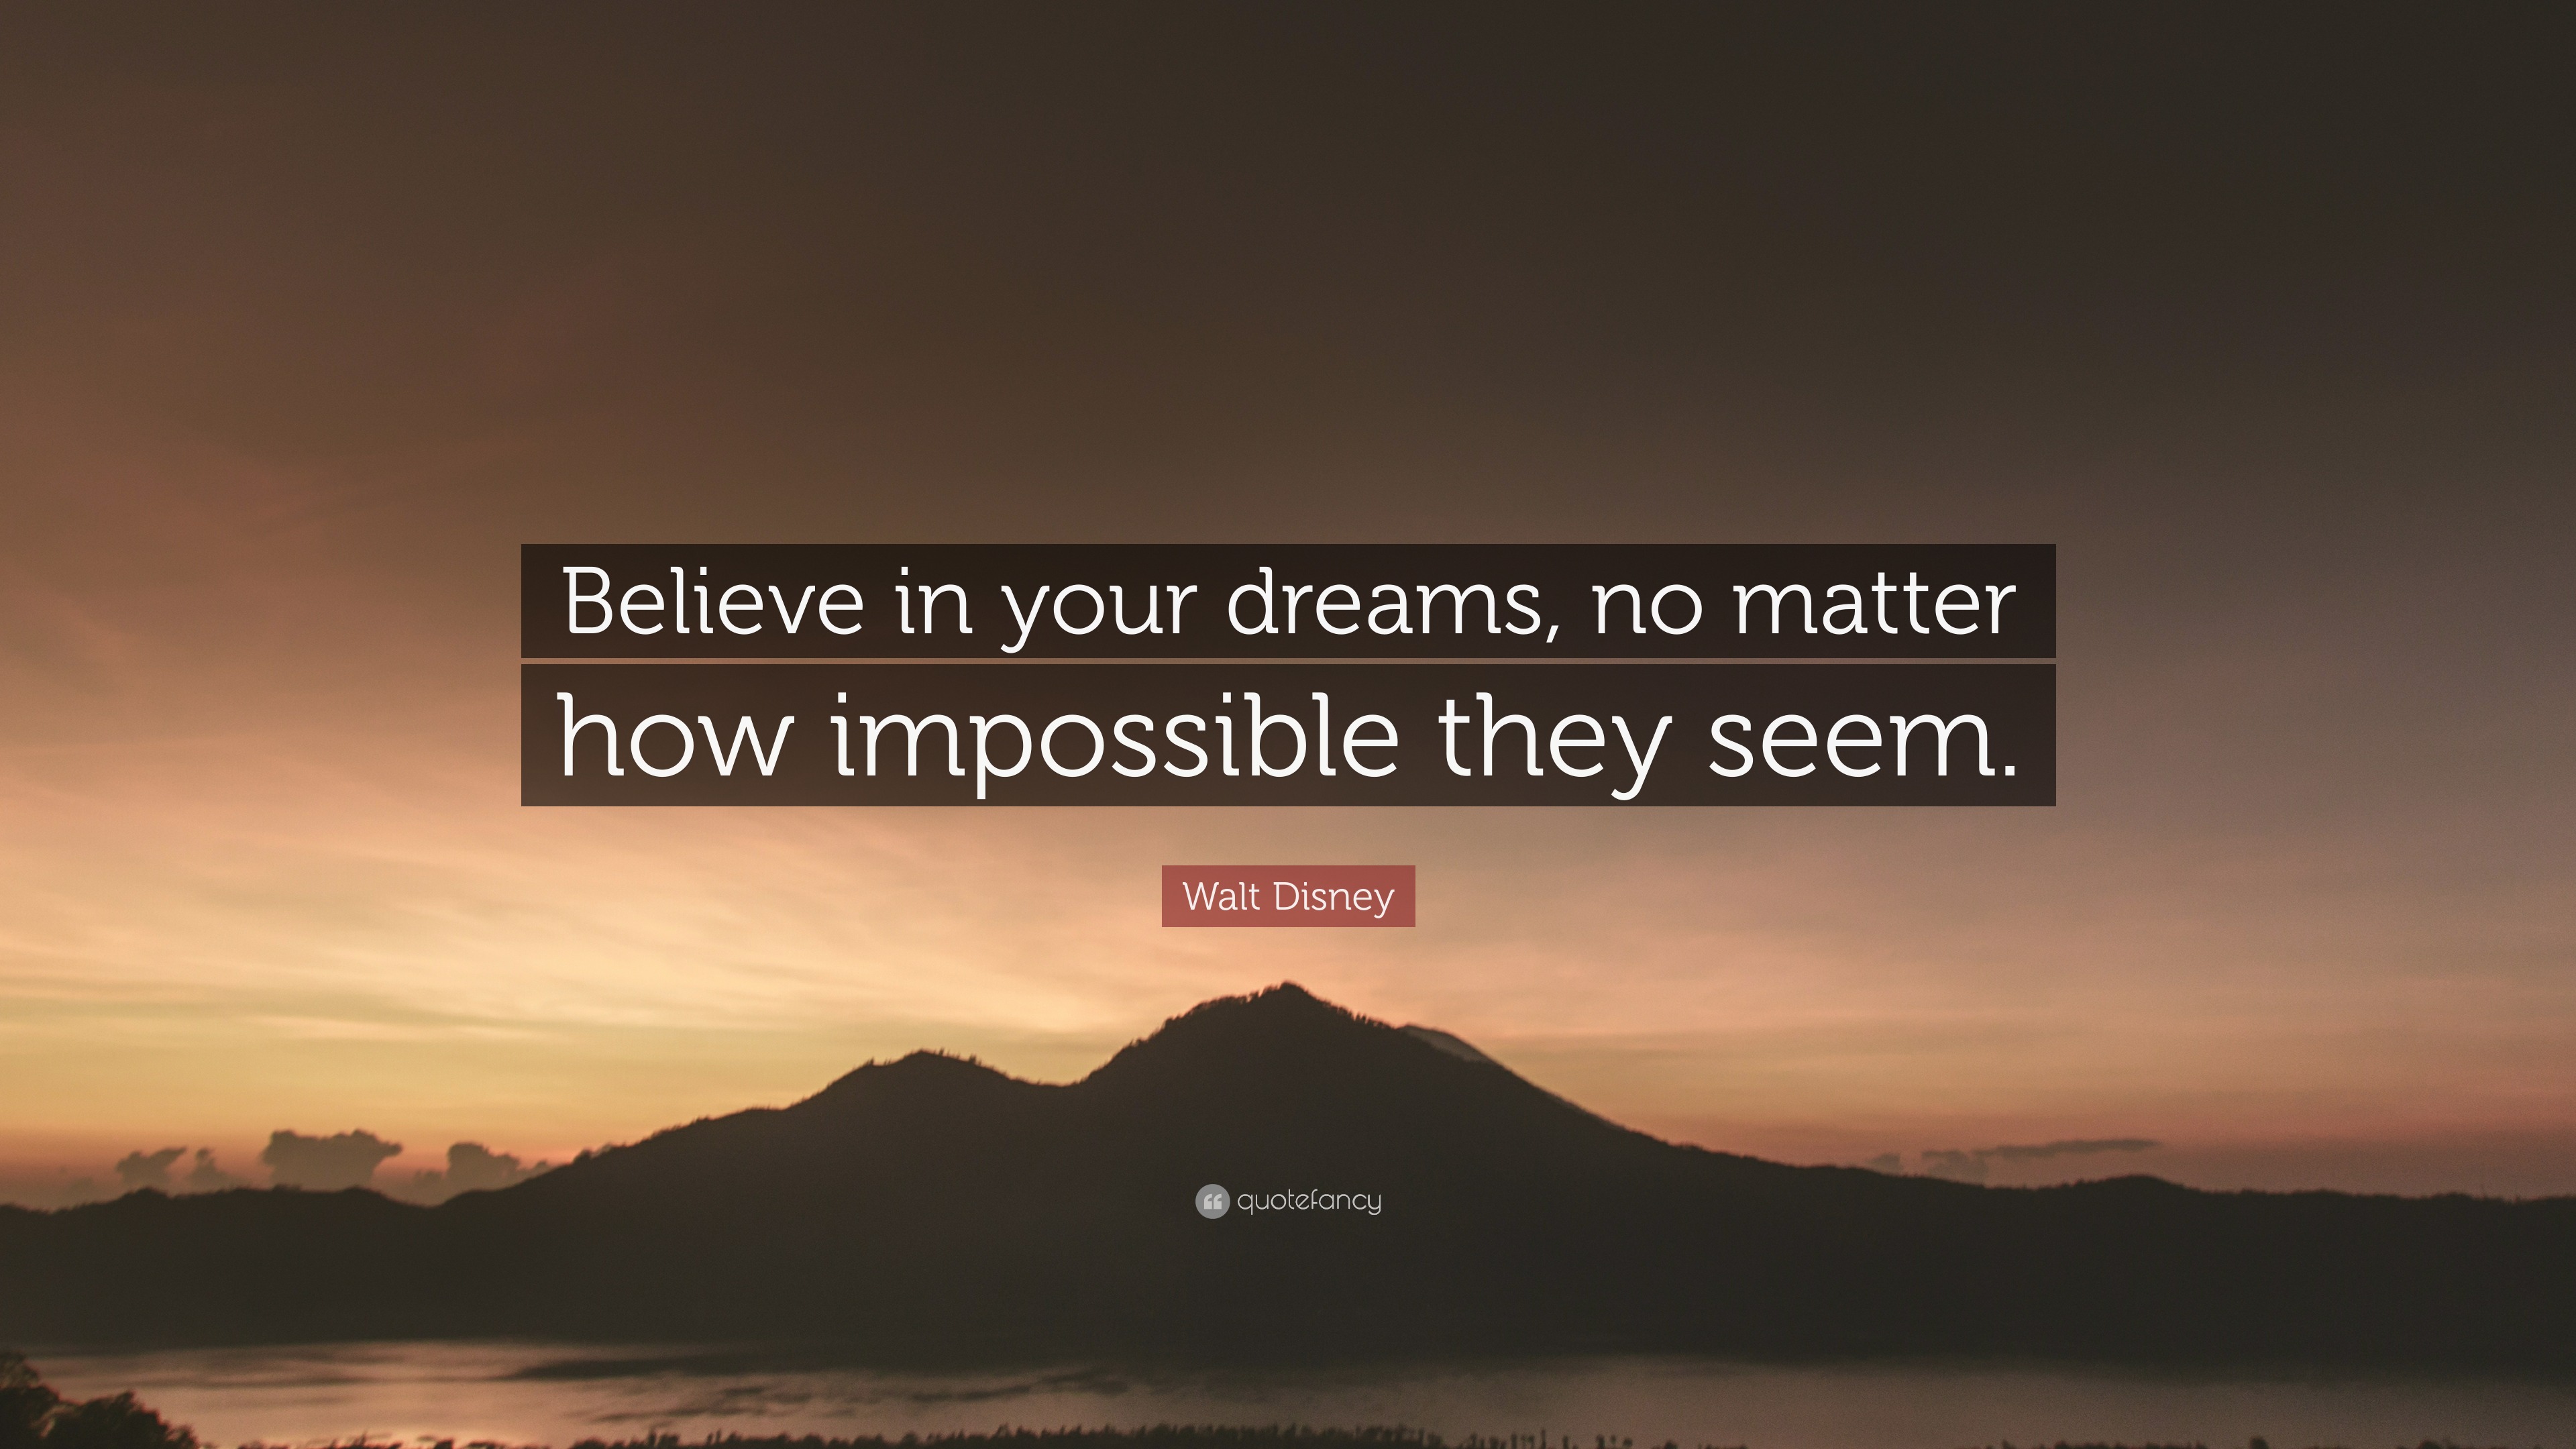 Walt Disney Quote: “Believe in your dreams, no matter how impossible